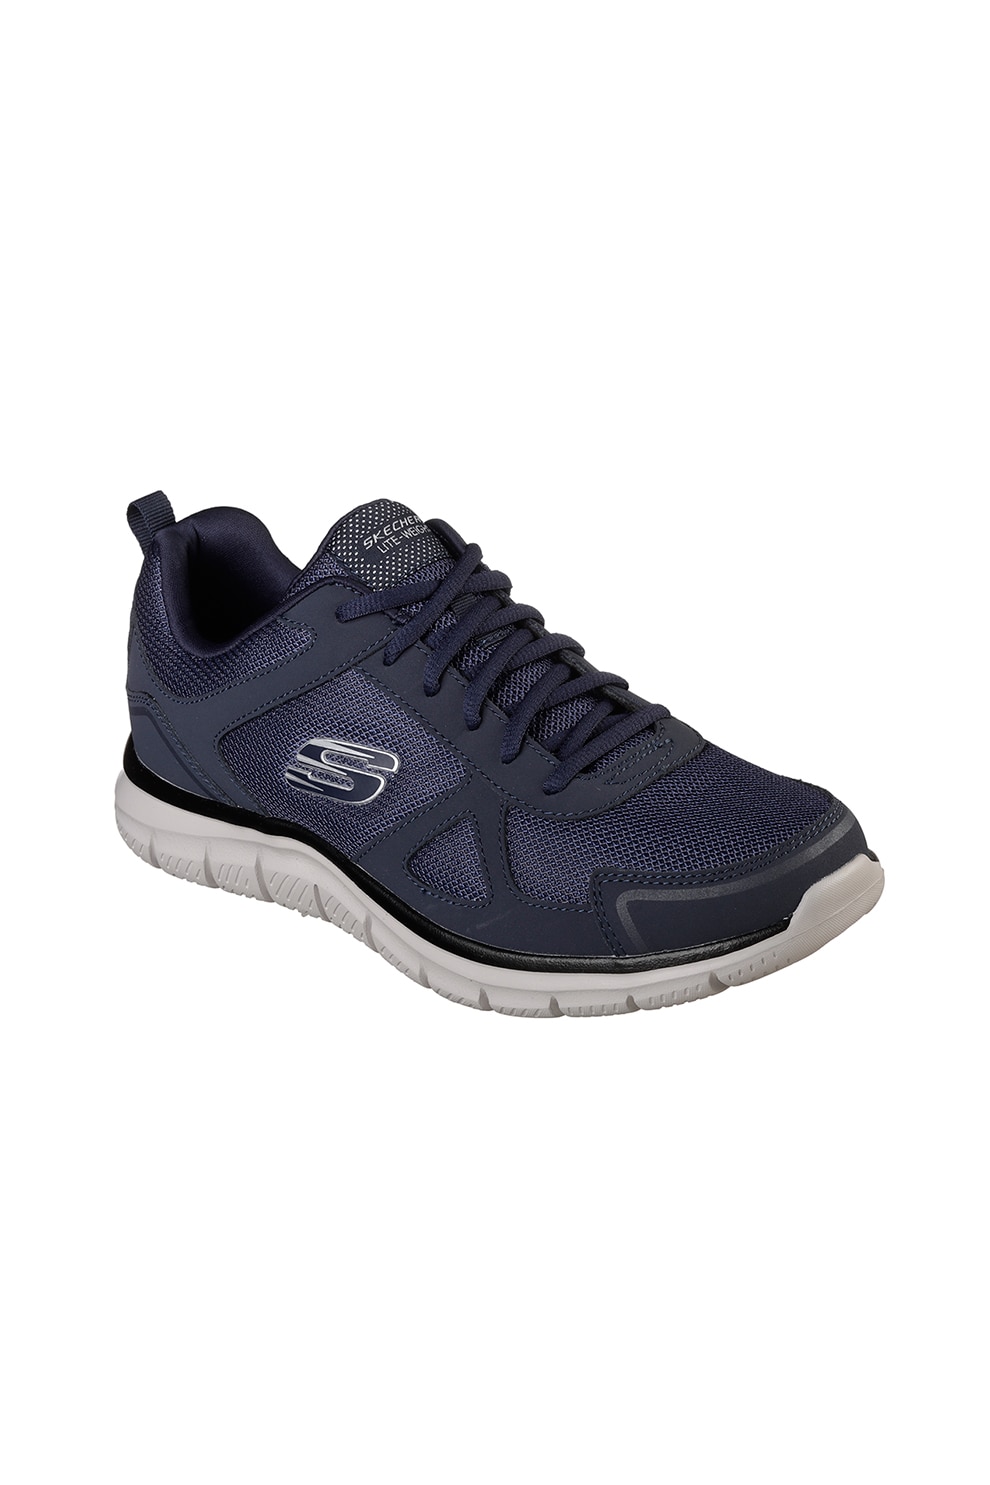 skechers sport with air cooled memory foam